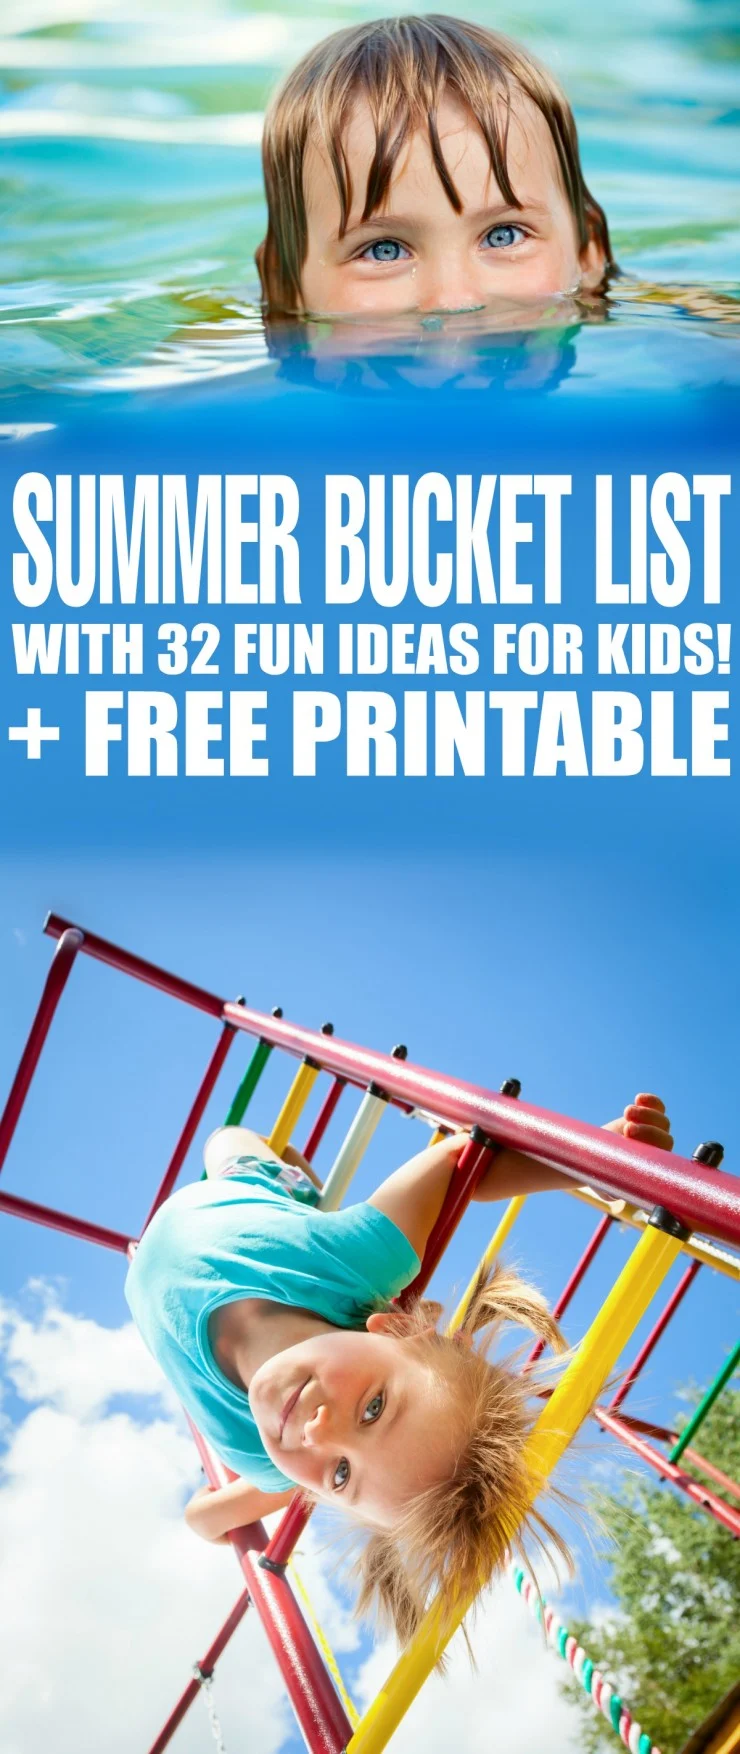 Grab this free Printable Summer Bucket List with 32 Fun Ideas for Kids that will help keep your kids busy all summer long!